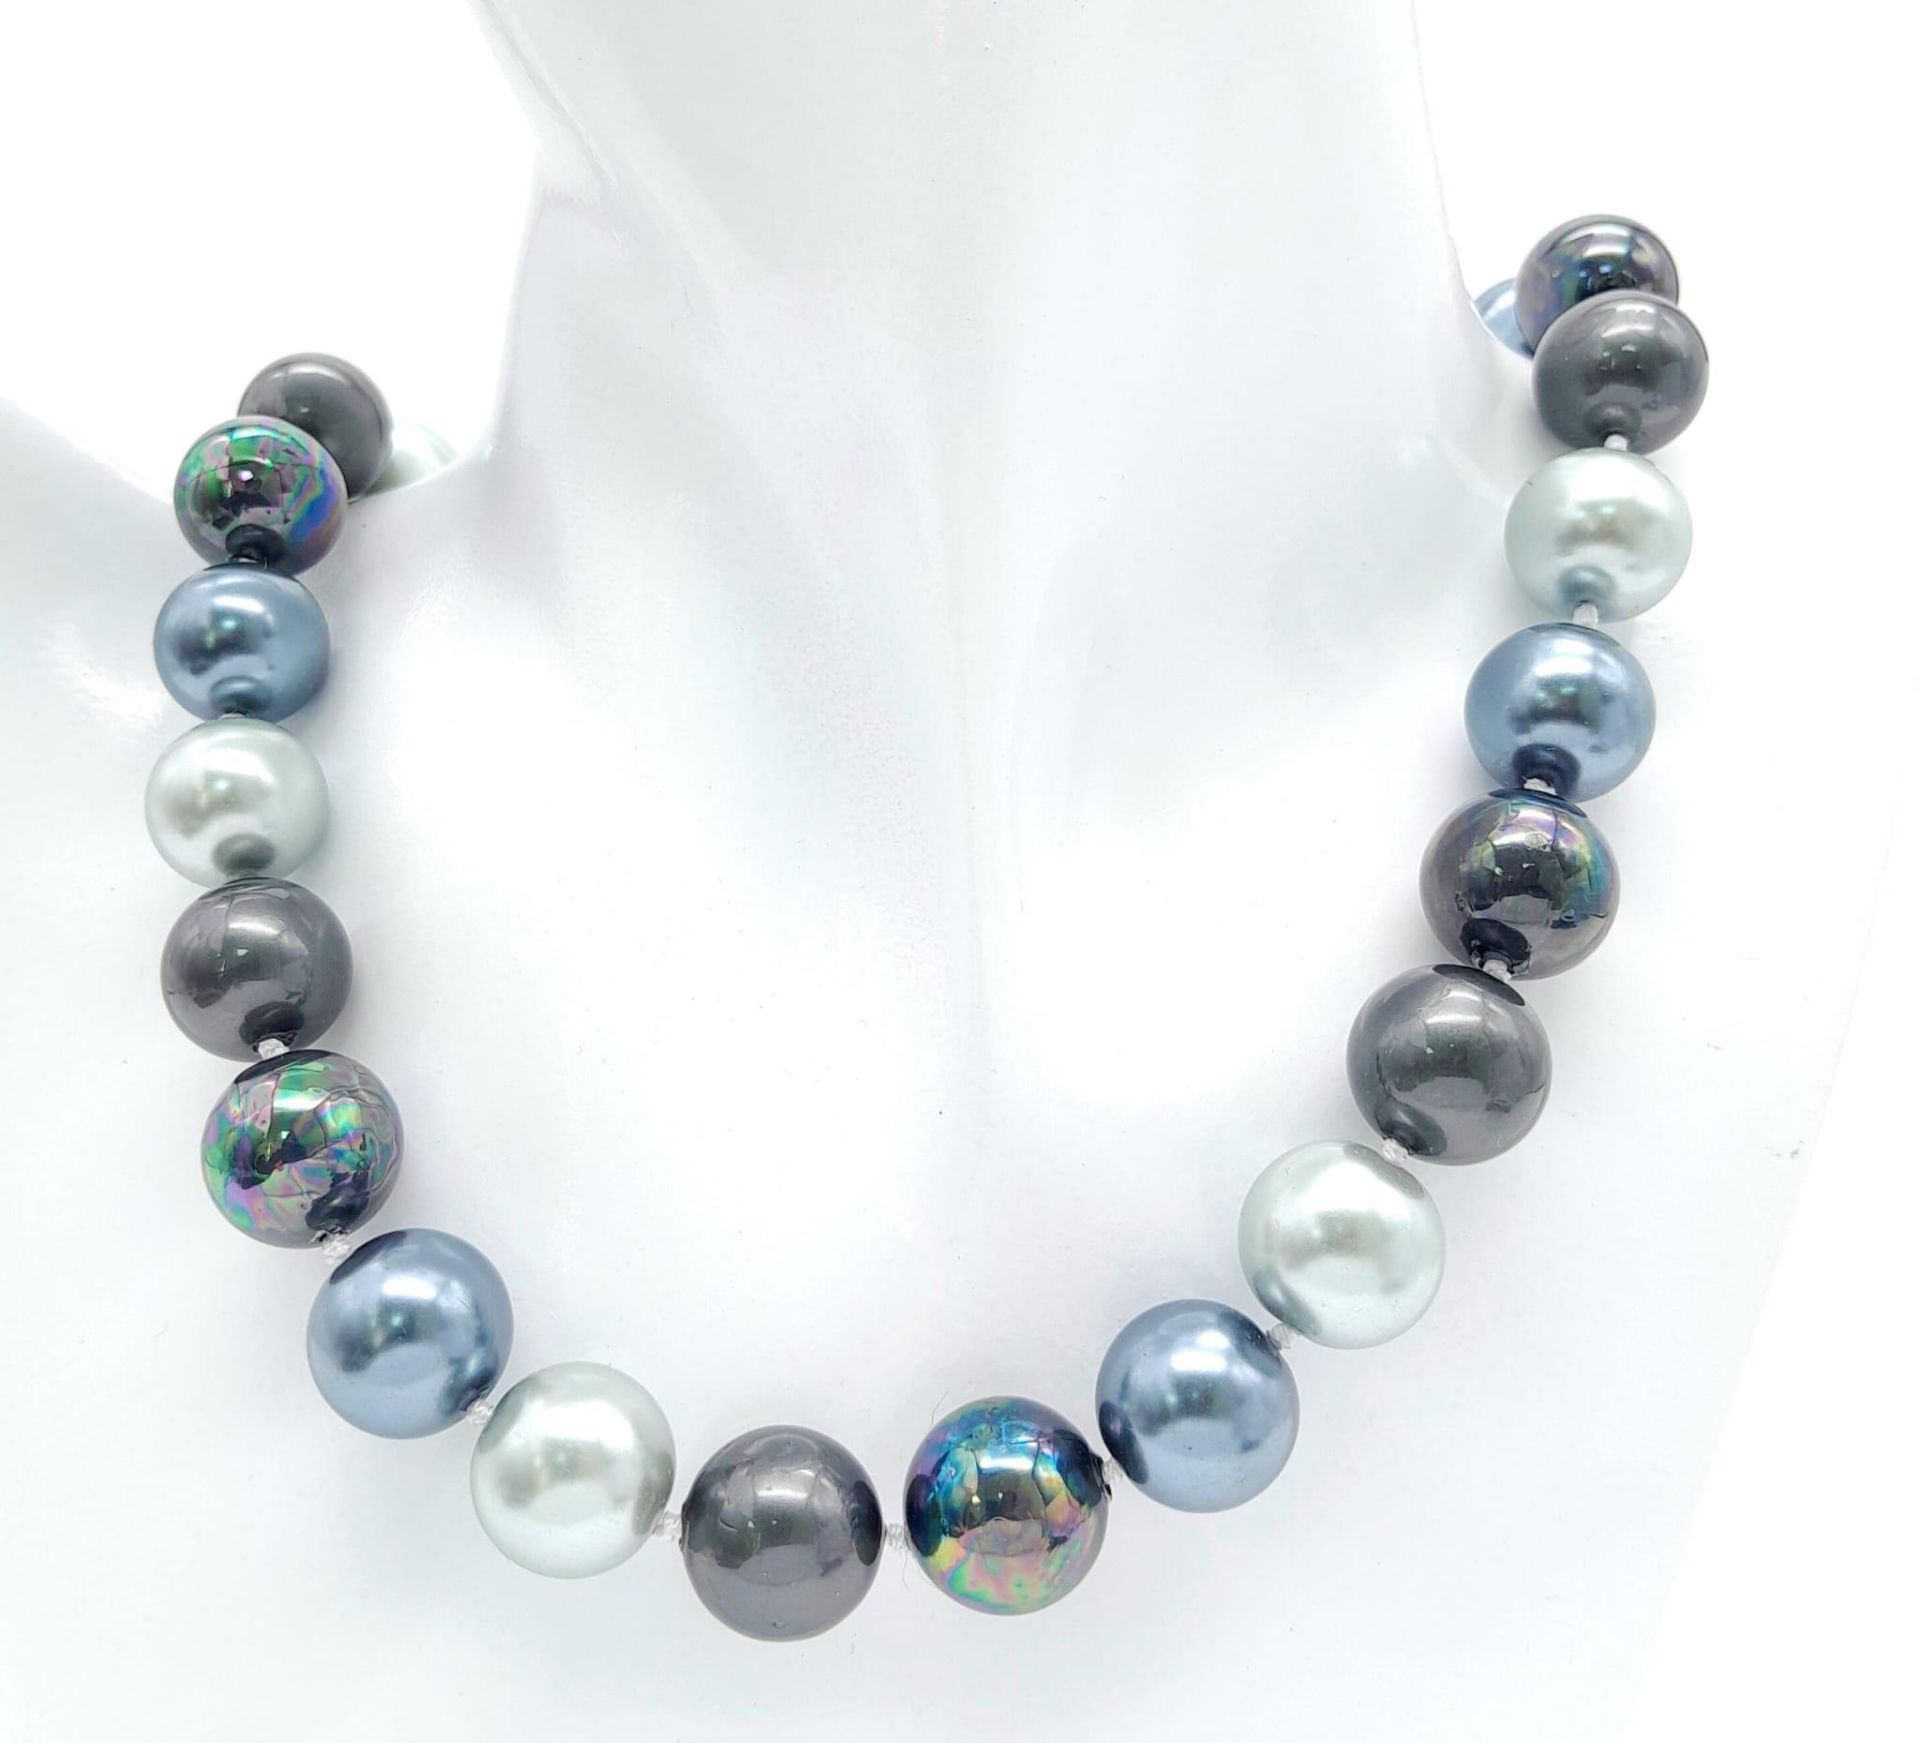 A Vibrant Metallic Shades of Grey South Sea Pearl Shell Necklace. 14mm beads. 42cm necklace length.